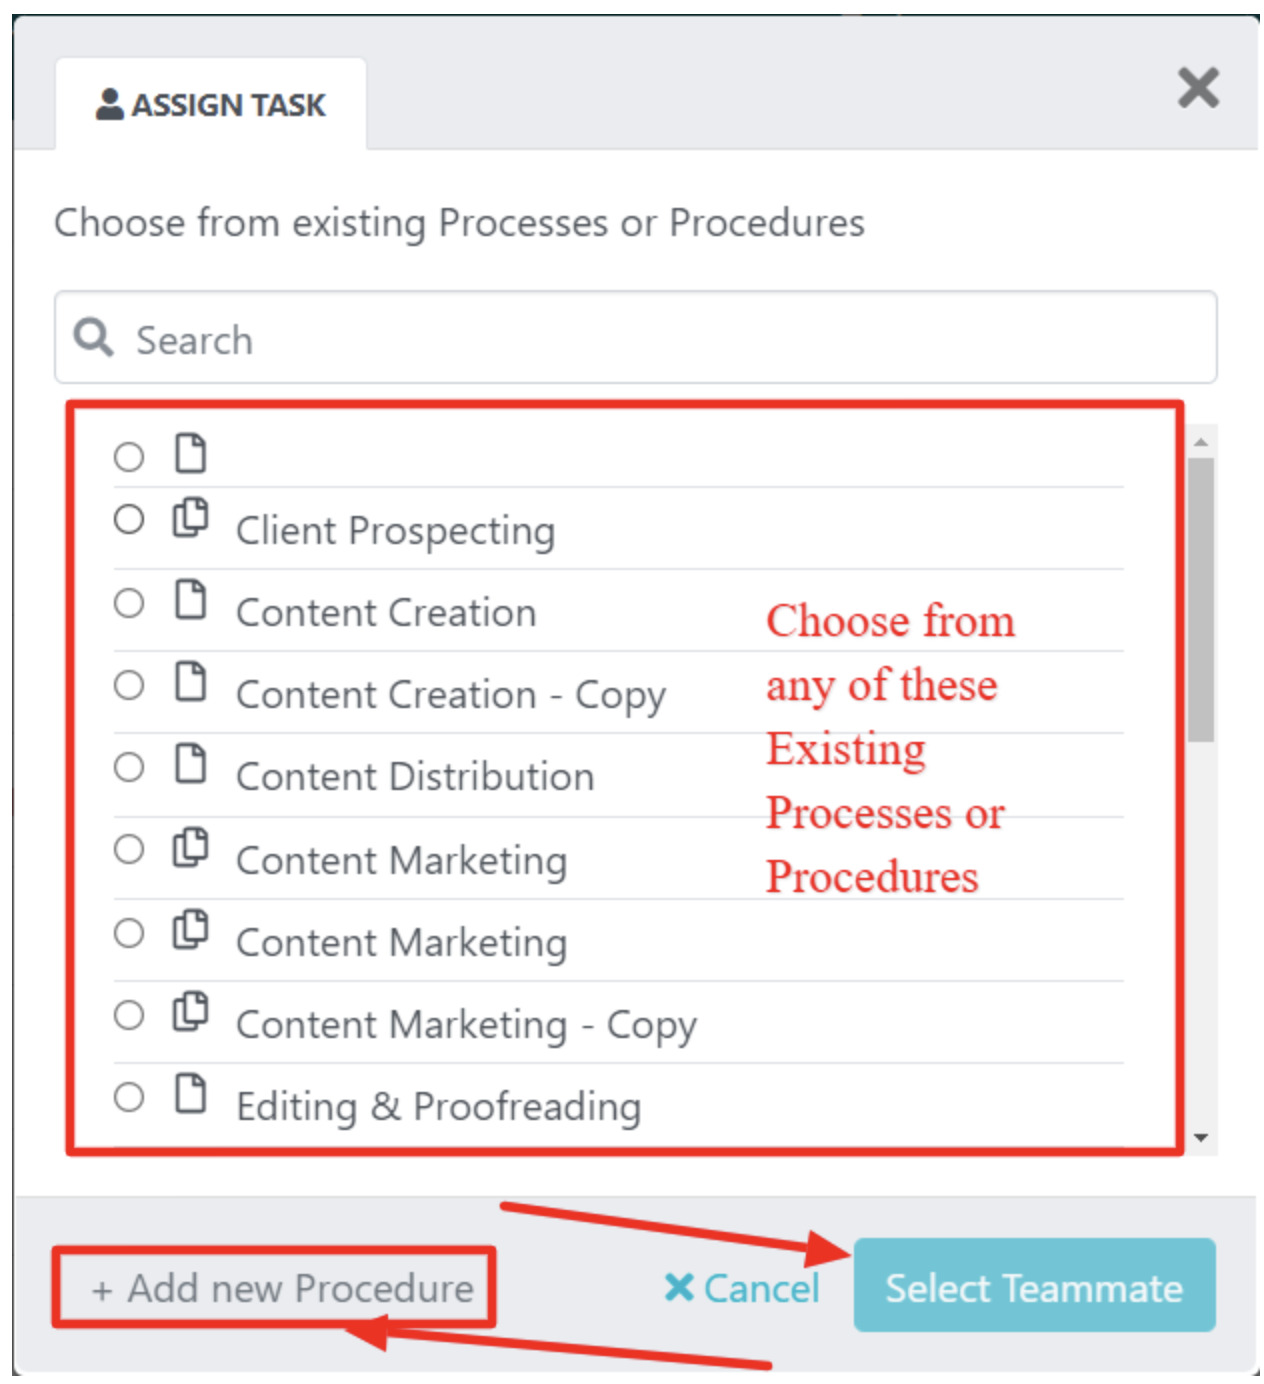 assign tasks from existing procedures or processes to a teammate 2